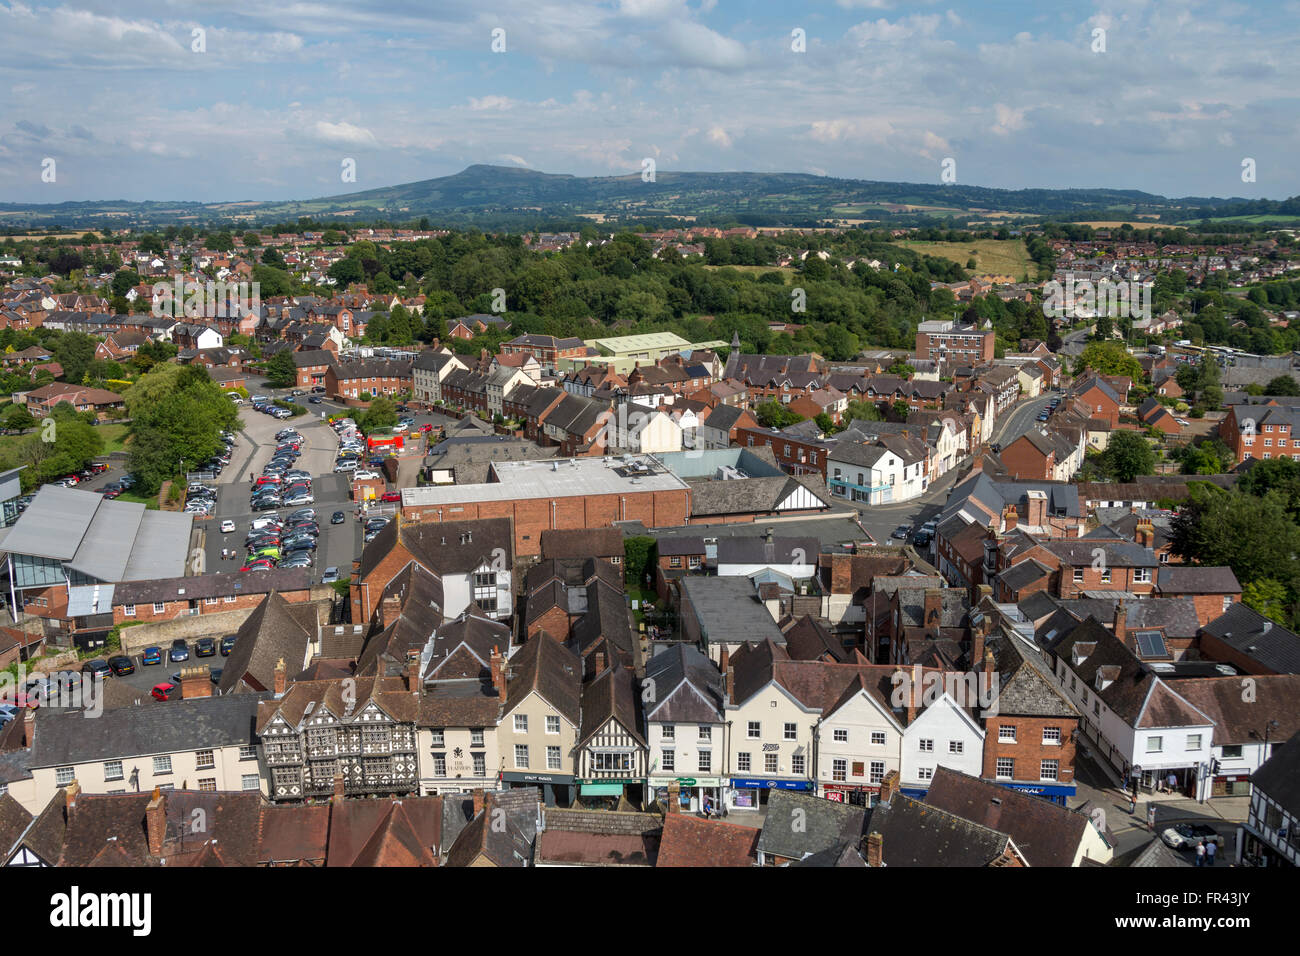 Titterstone Clee Hill and the town of Ludlow from the tower of the Parish Church of St. Laurence, Ludlow, Shropshire, England UK Stock Photo